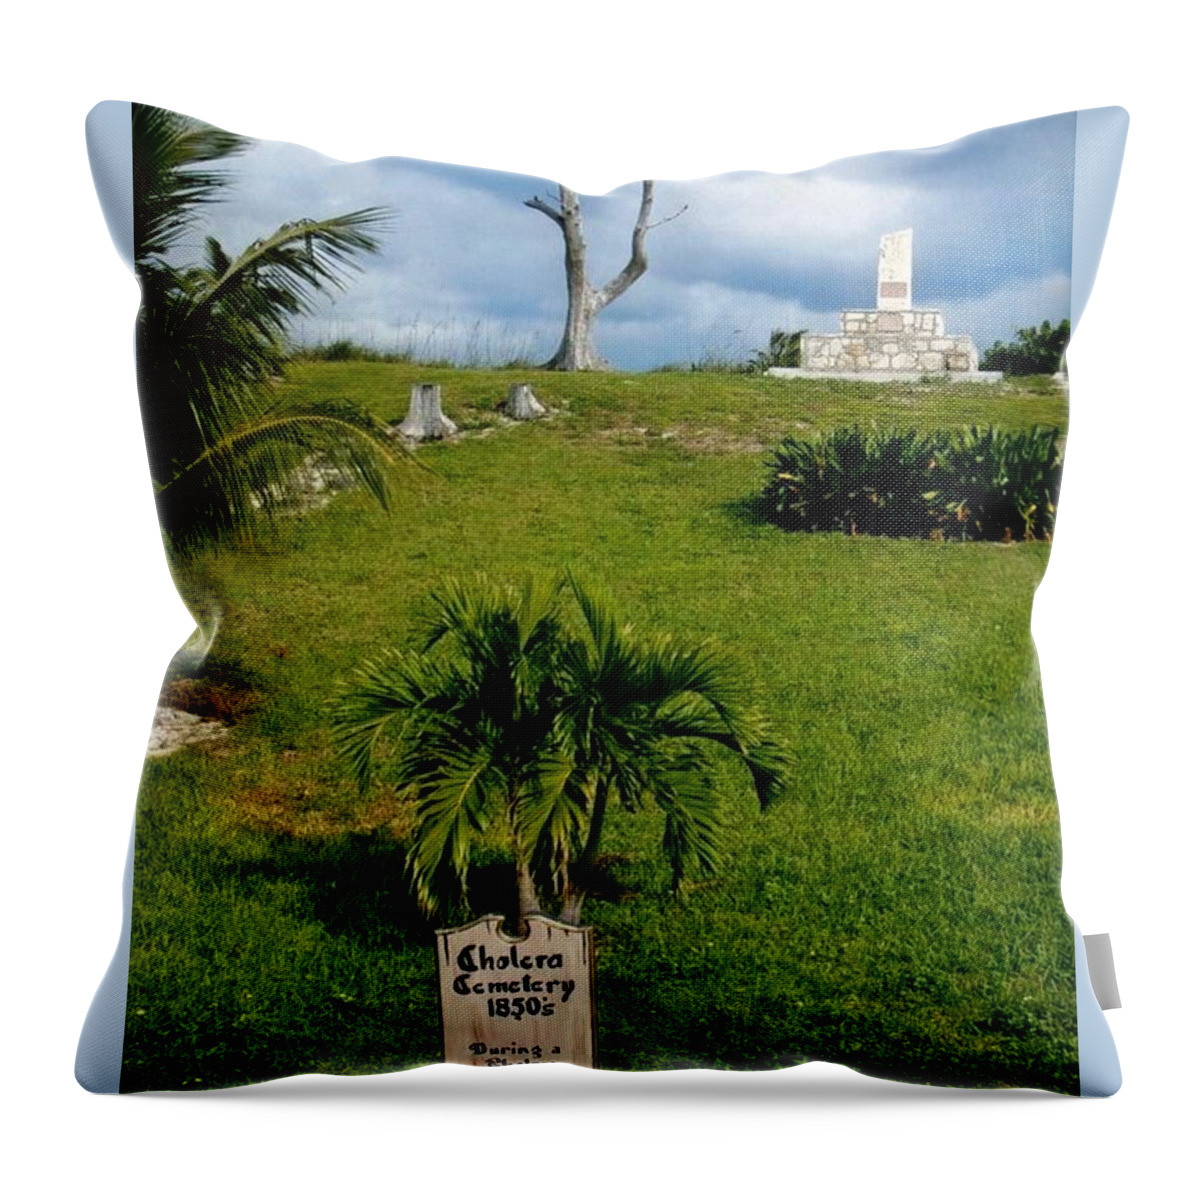 Bahamas Throw Pillow featuring the photograph Cholera Cemetary by Robert Nickologianis